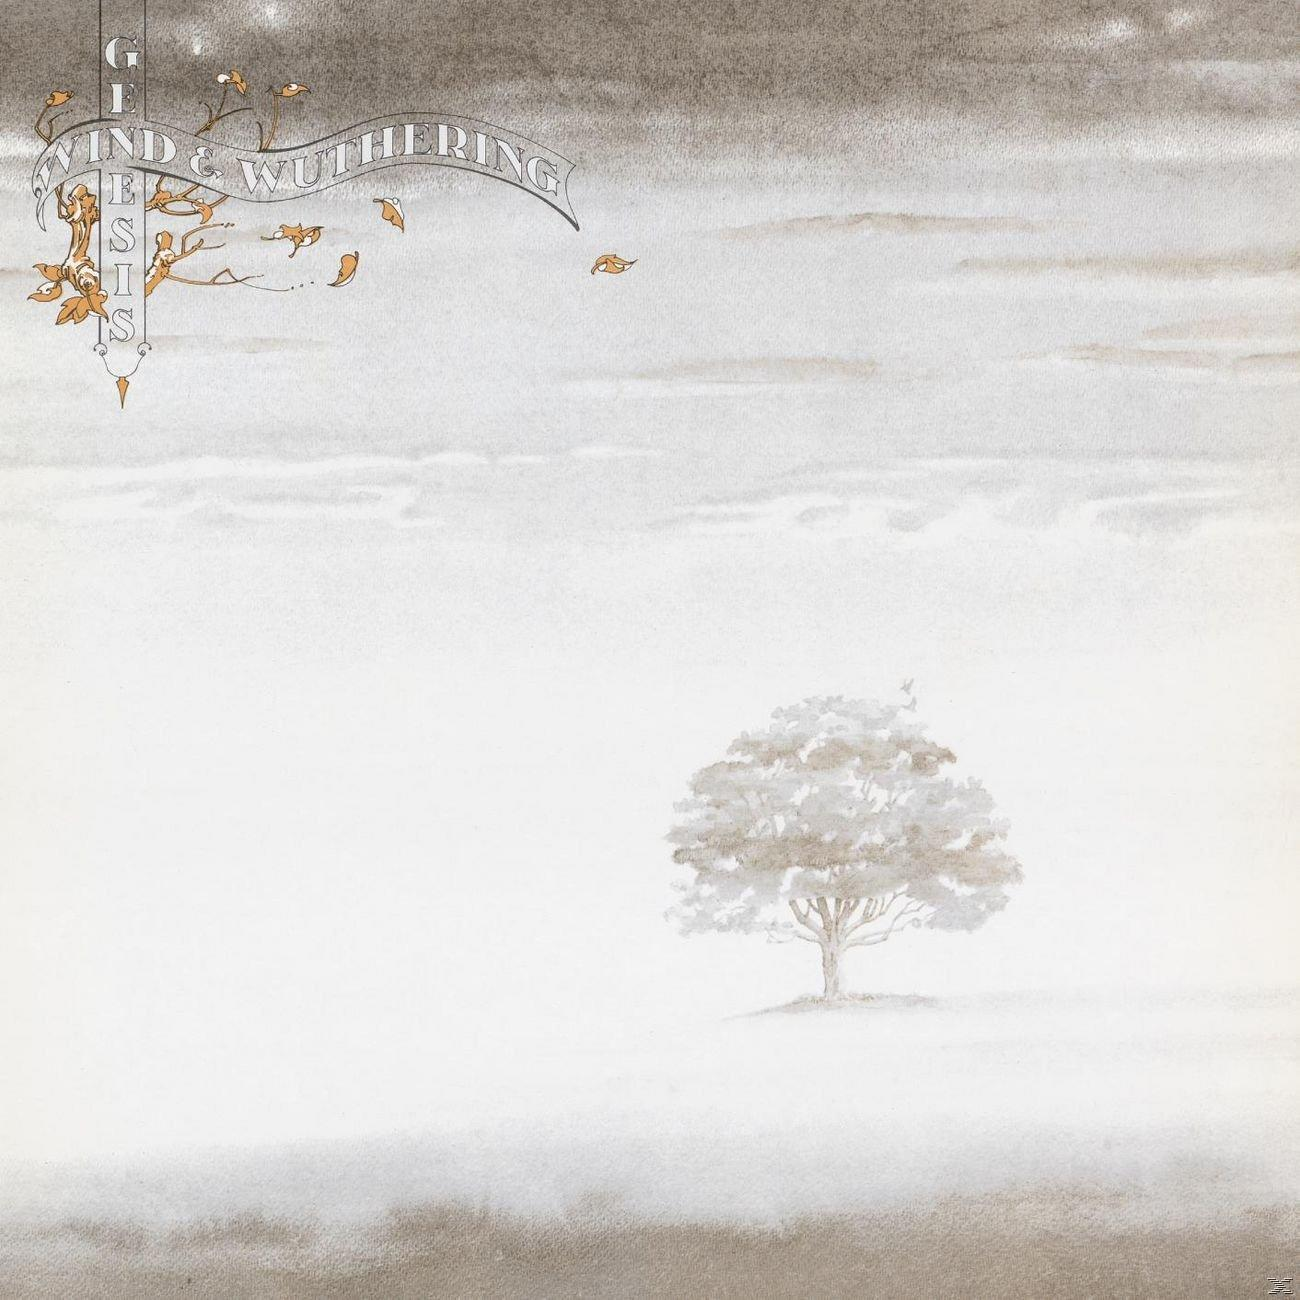 Wind - Wuthering-Remaster - Genesis (CD) And